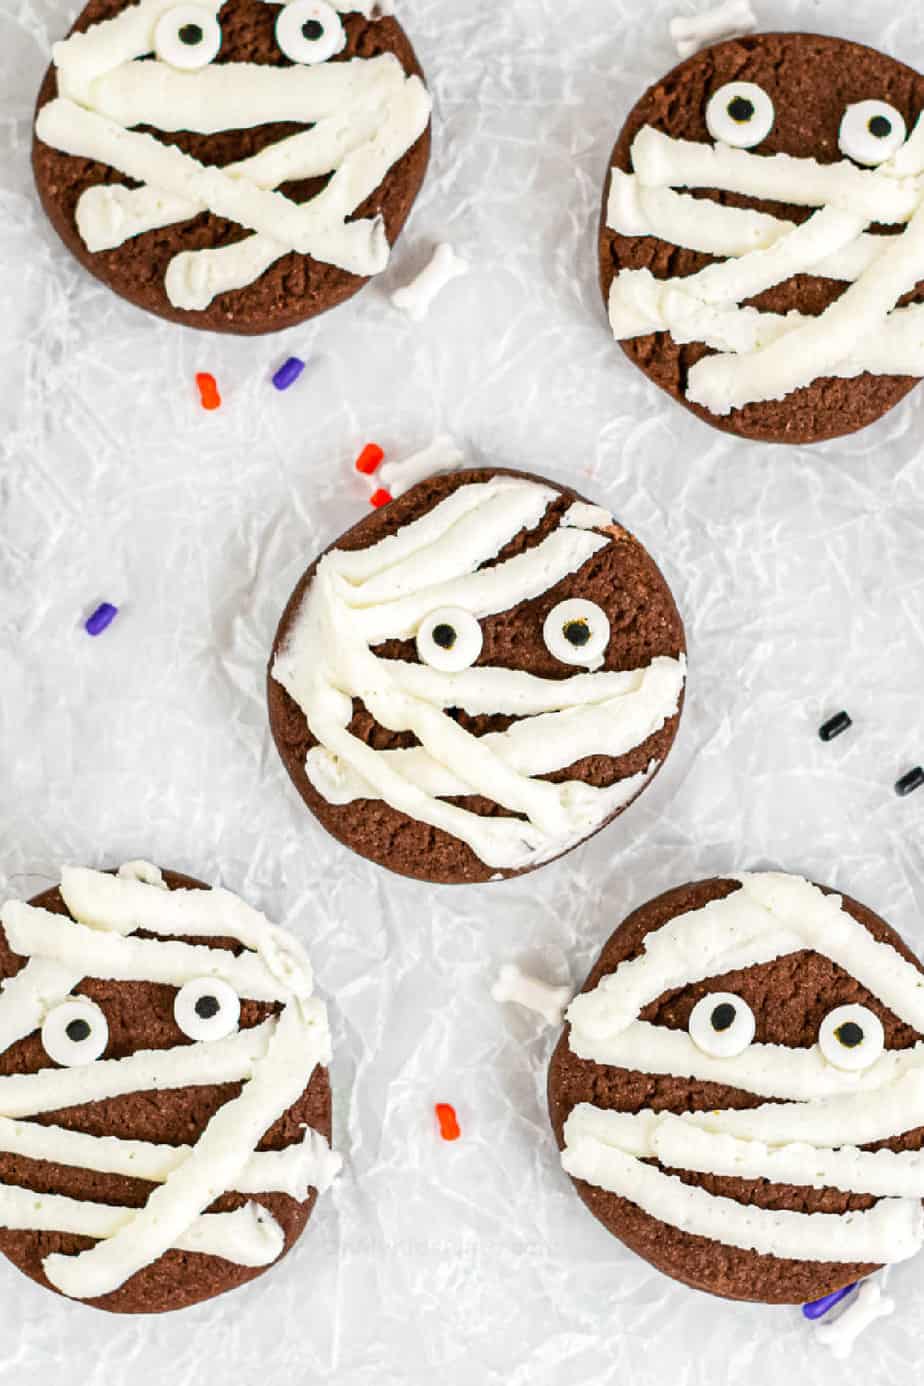 Close up picture of five chocolate cookies decorated with frosting and candy eyes to look like mummies